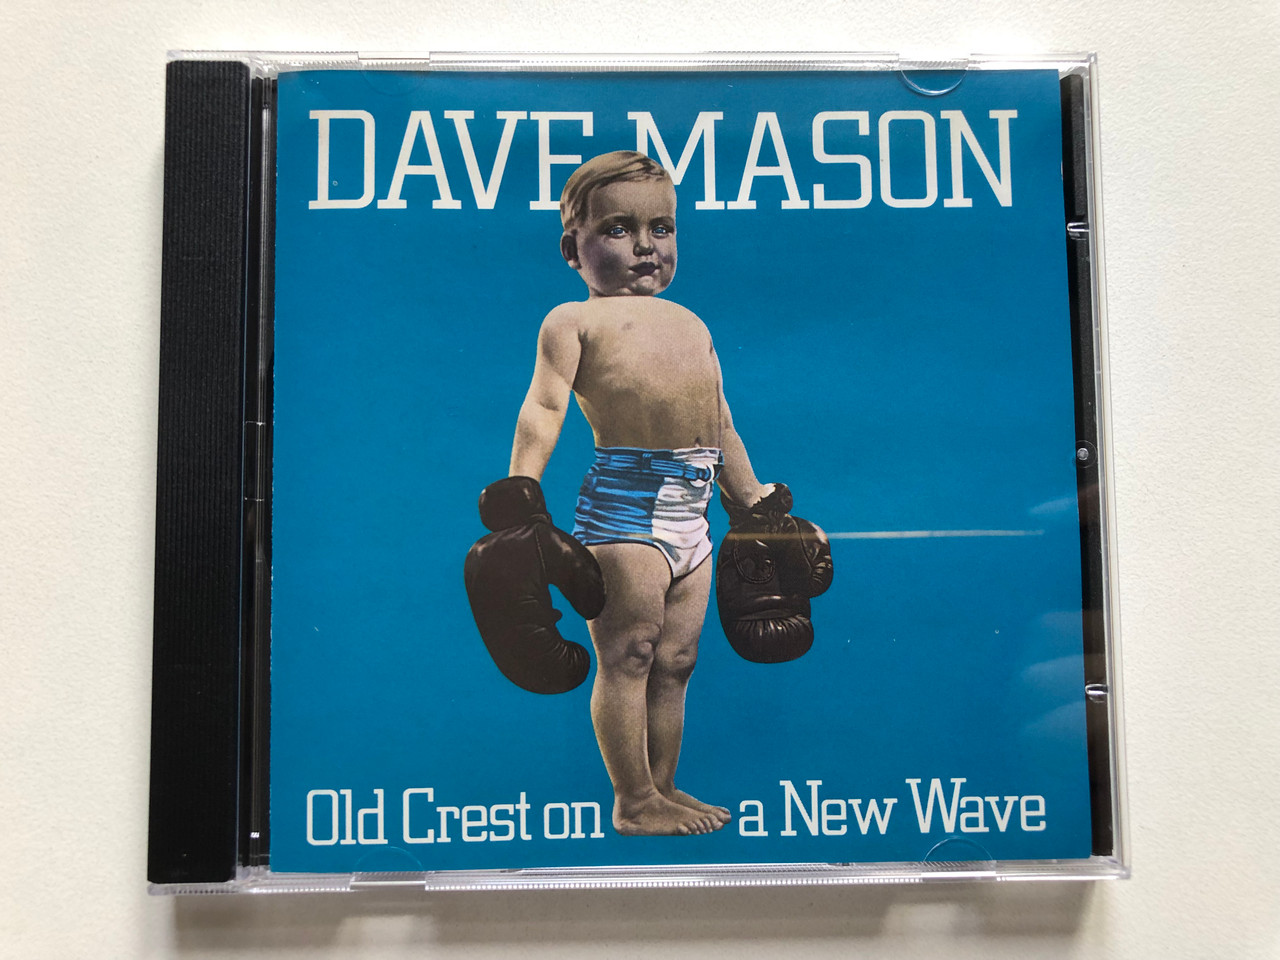 https://cdn10.bigcommerce.com/s-62bdpkt7pb/products/0/images/307630/Dave_Mason_Old_Crest_On_A_New_Wave_One_Way_Records_Audio_CD_1996_A_26886_1__04668.1698765983.1280.1280.JPG?c=2